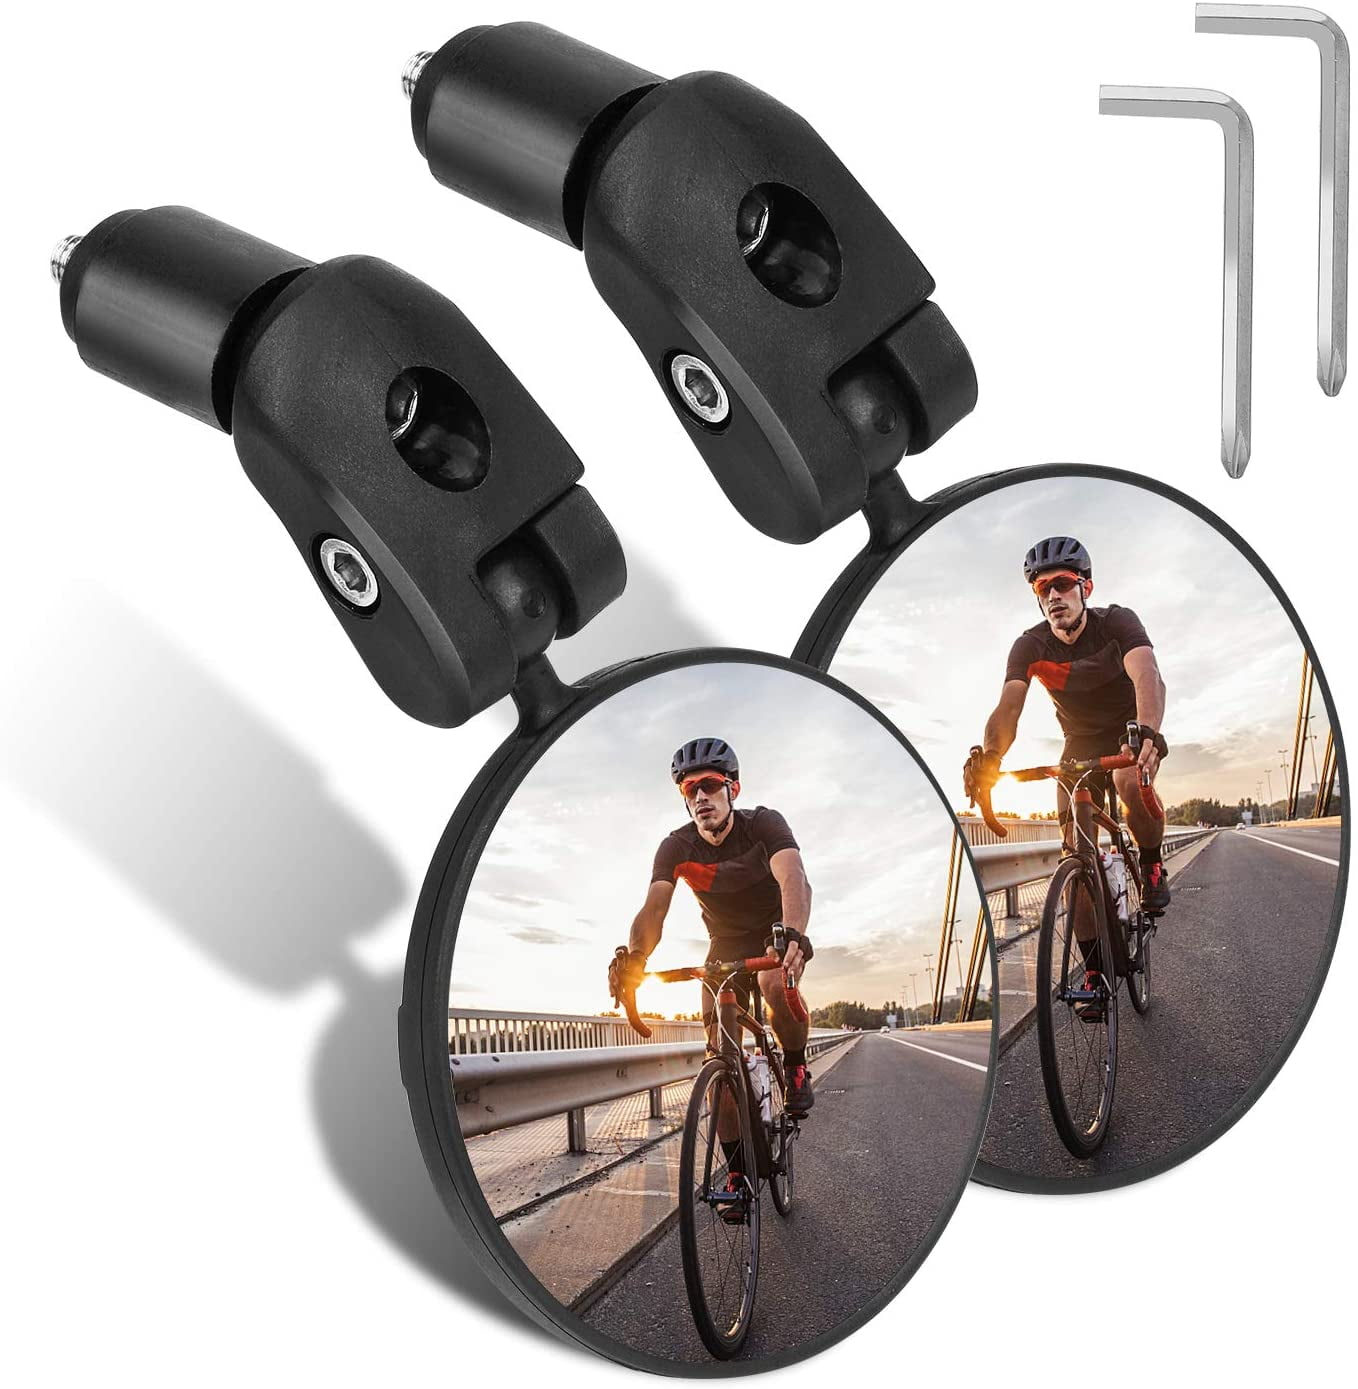 Easy Install Adjustable Handlebar Rear View Mirrors for Bicycle Electric Motorcycle Mountain Road Bike Bar End Bike Mirror 2 PCS Bike Mirror 